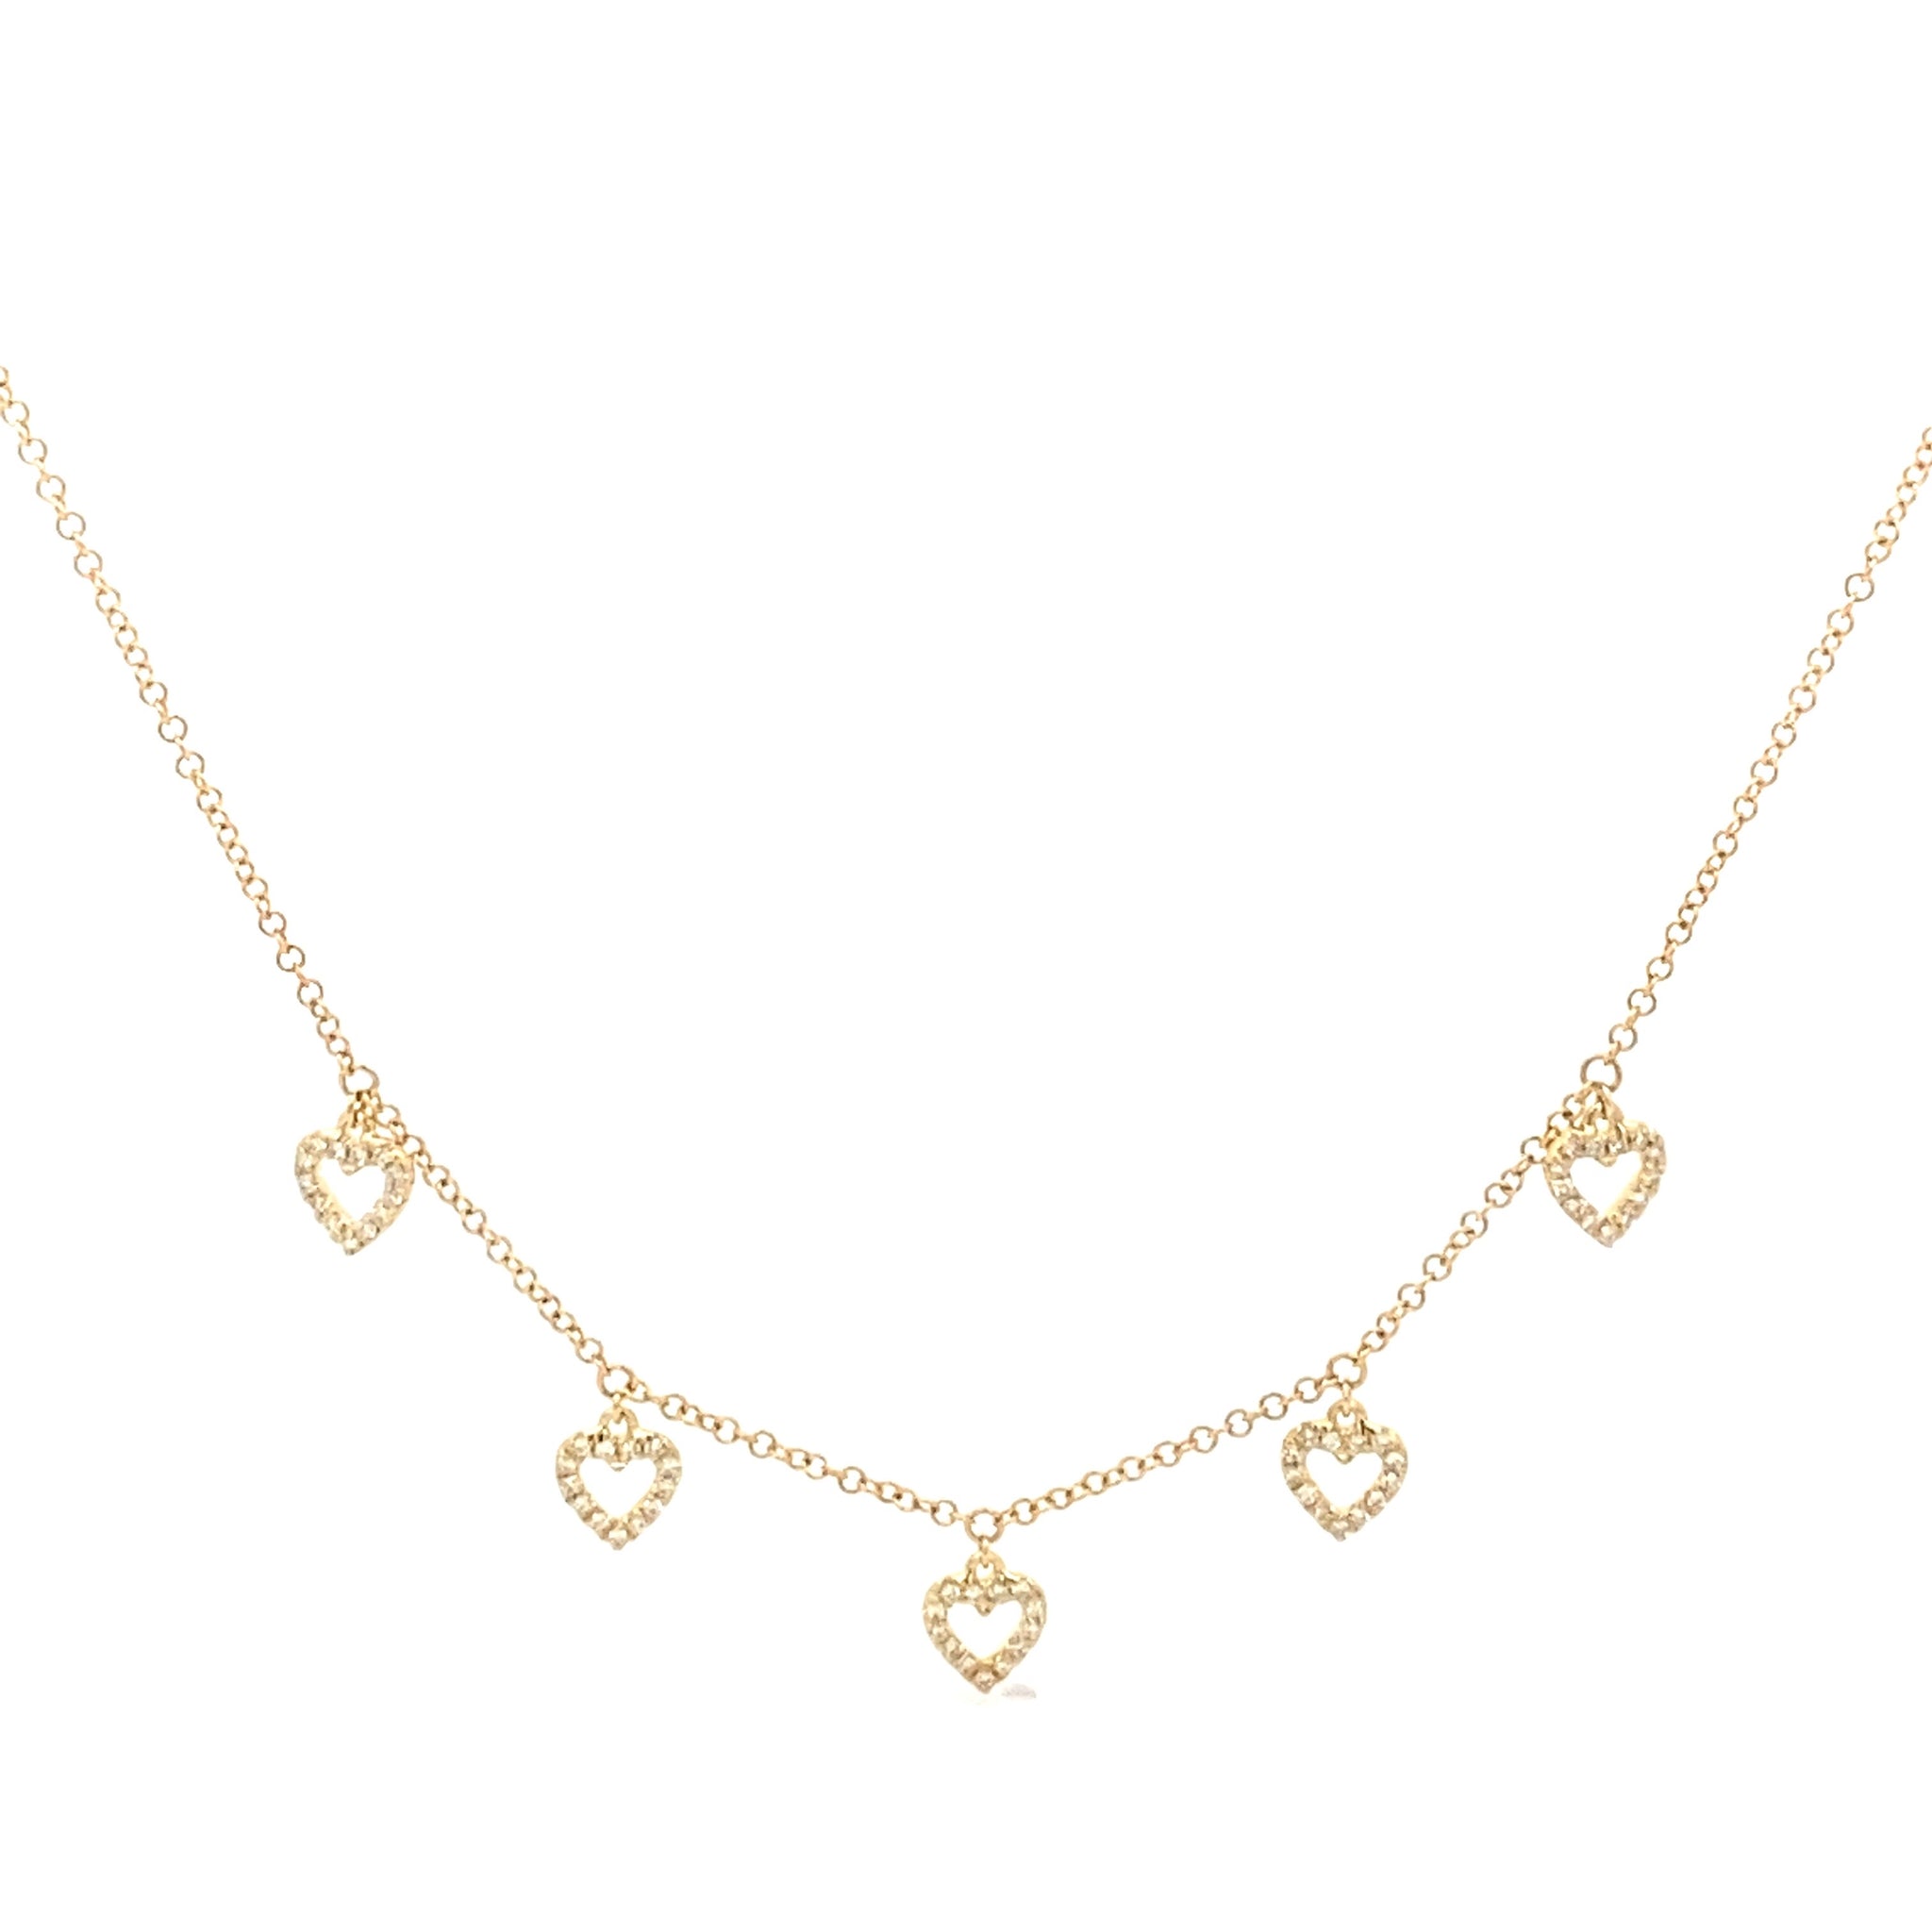 Dainty Hanging Hearts Necklace